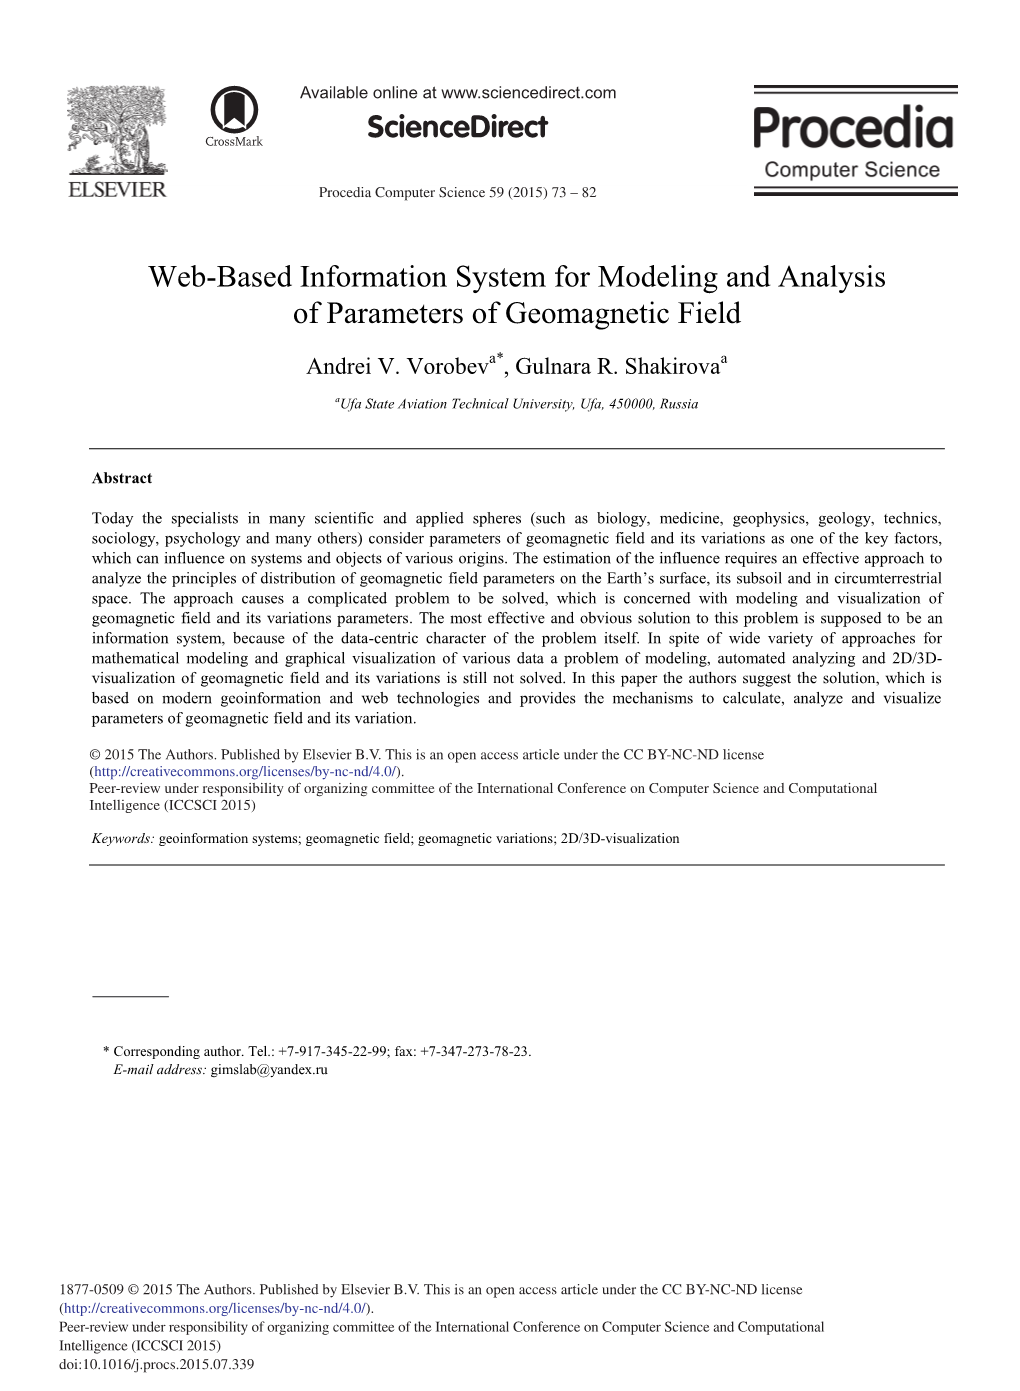 Web-Based Information System for Modeling and Analysis of Parameters of Geomagnetic Field